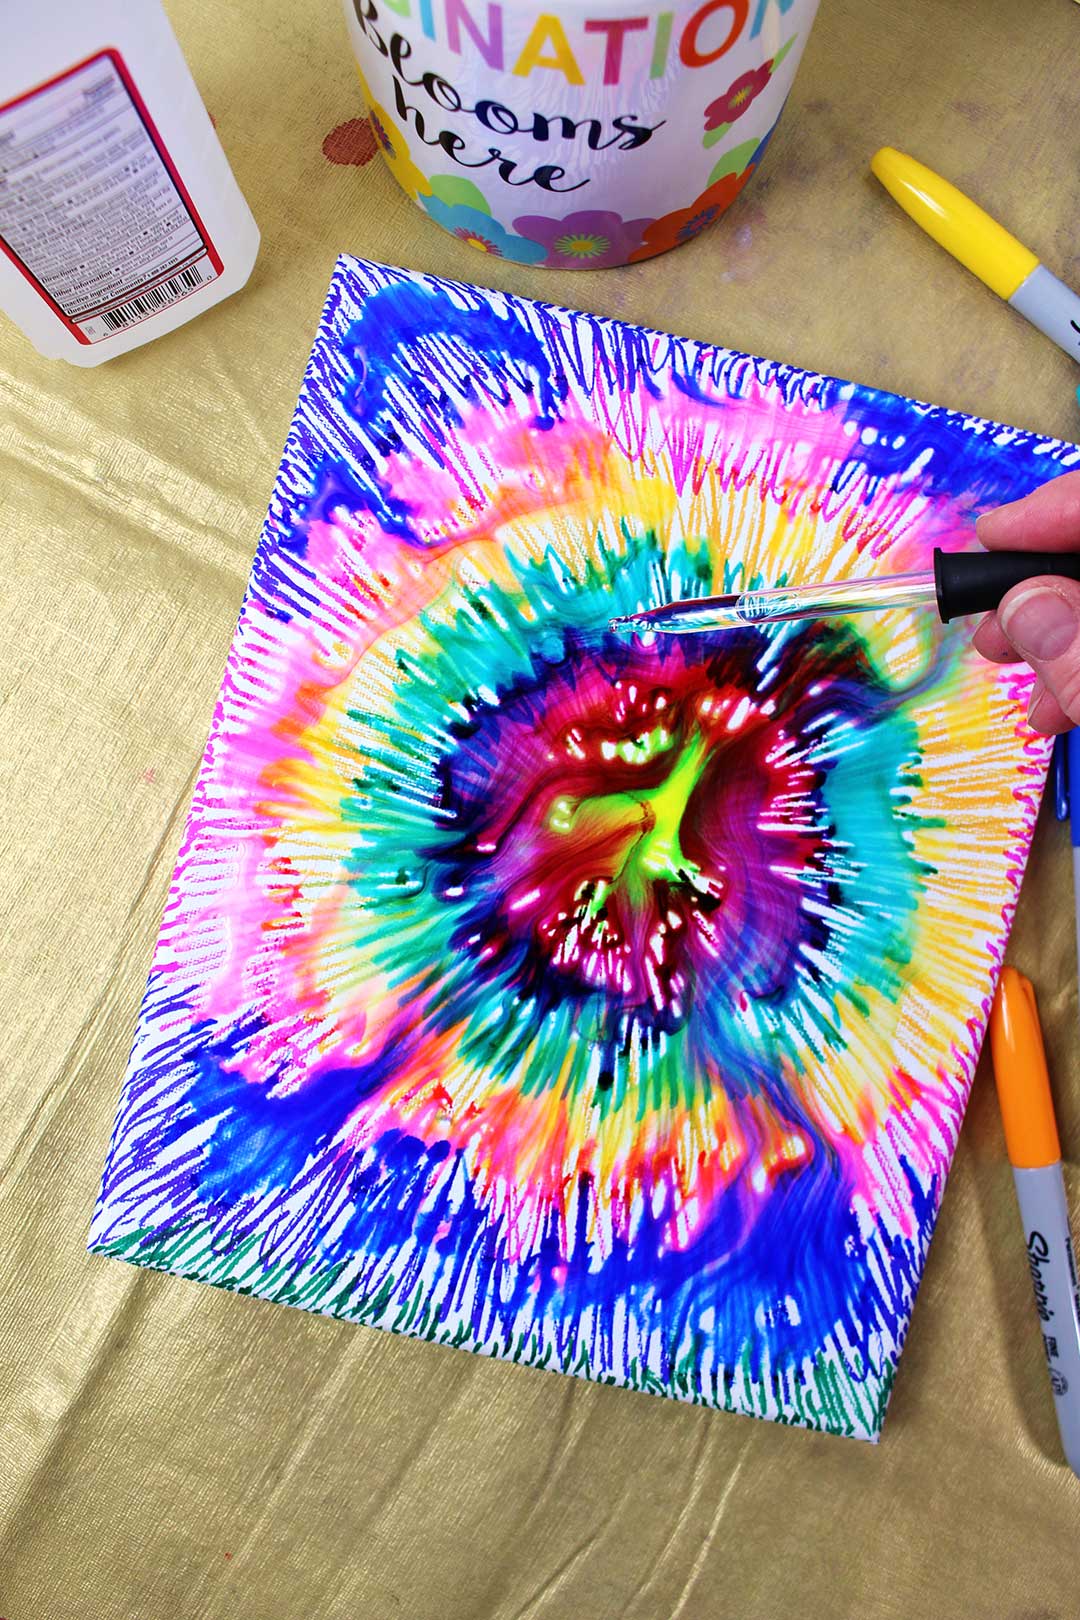 An eye dropper dripping rubbing alcohol over a canvas colored with sharpies in a tie dye pattern.